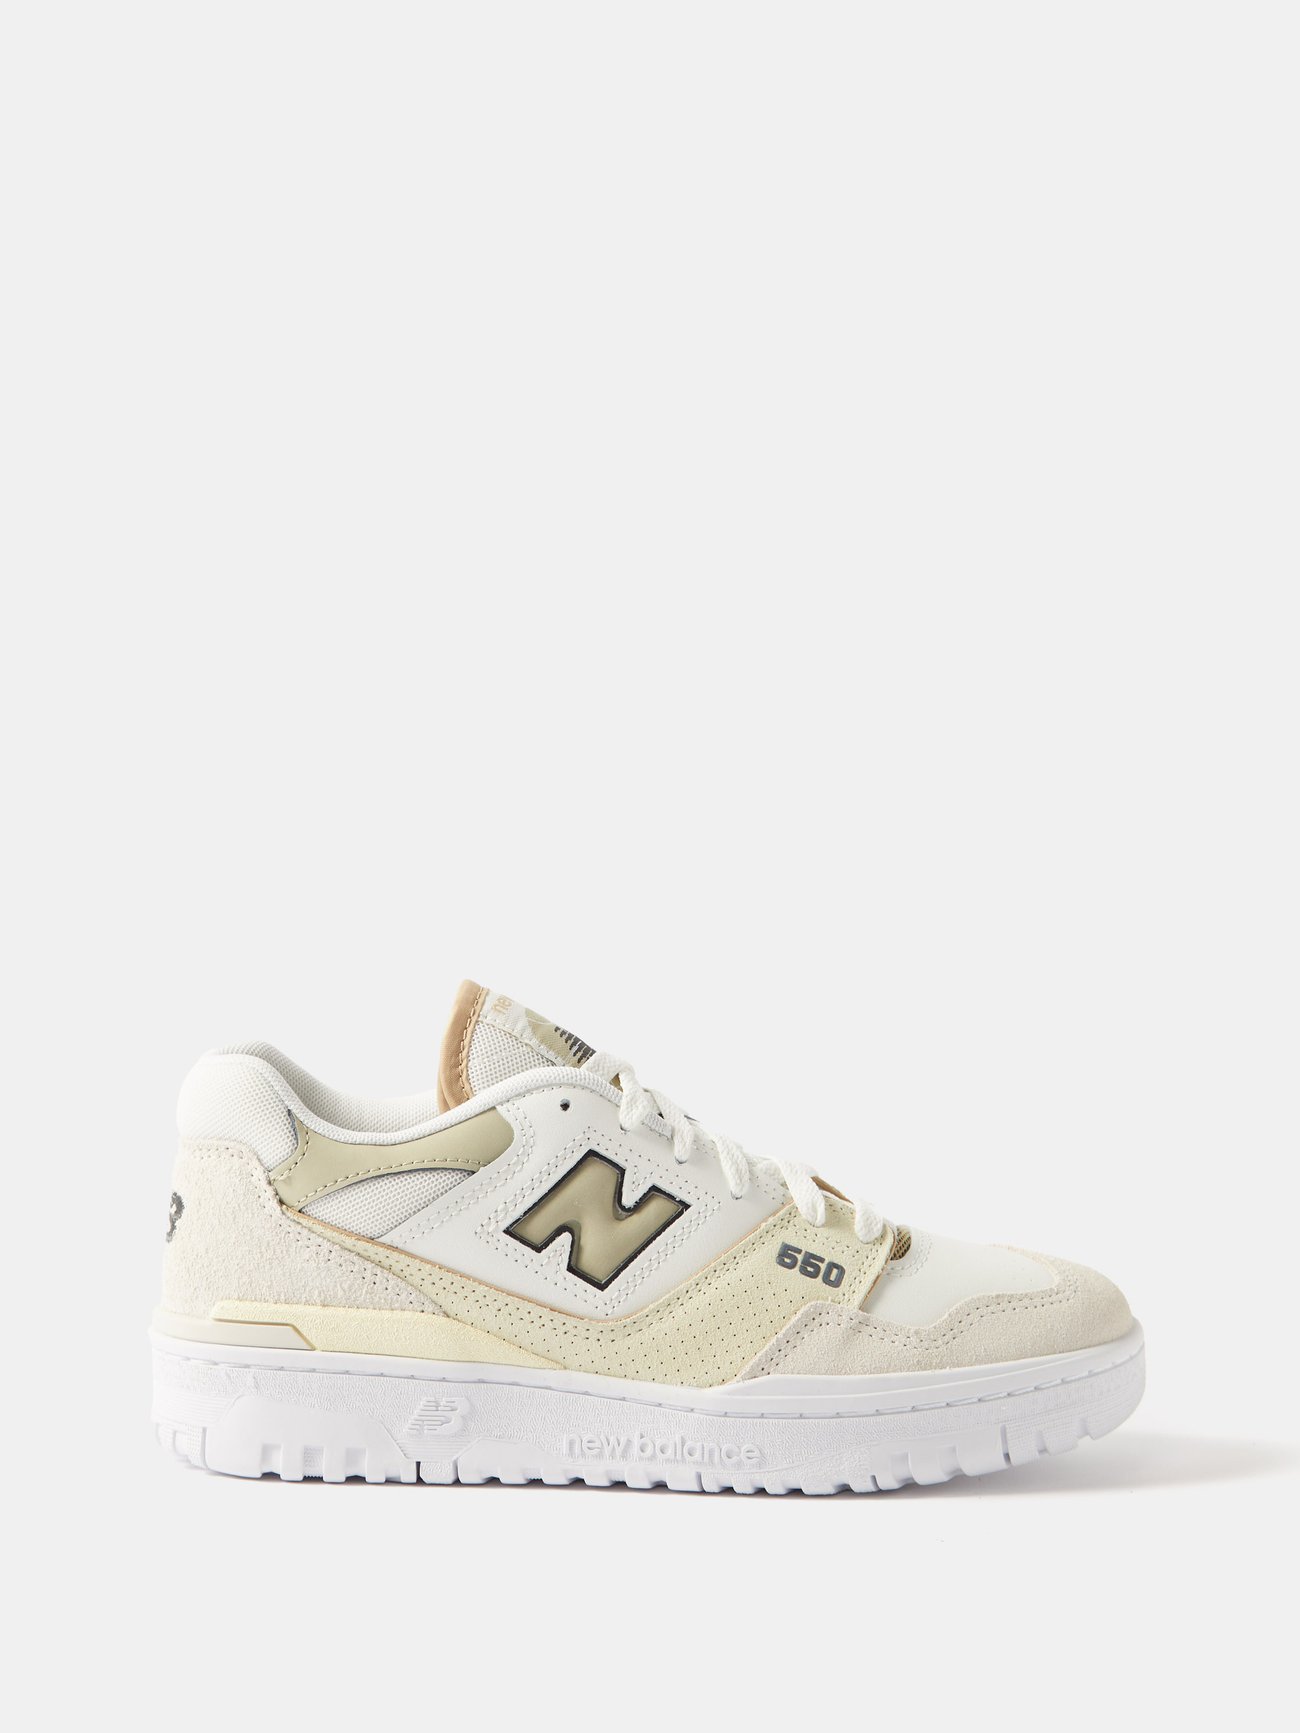 White 550 suede, leather and mesh trainers | New Balance ...